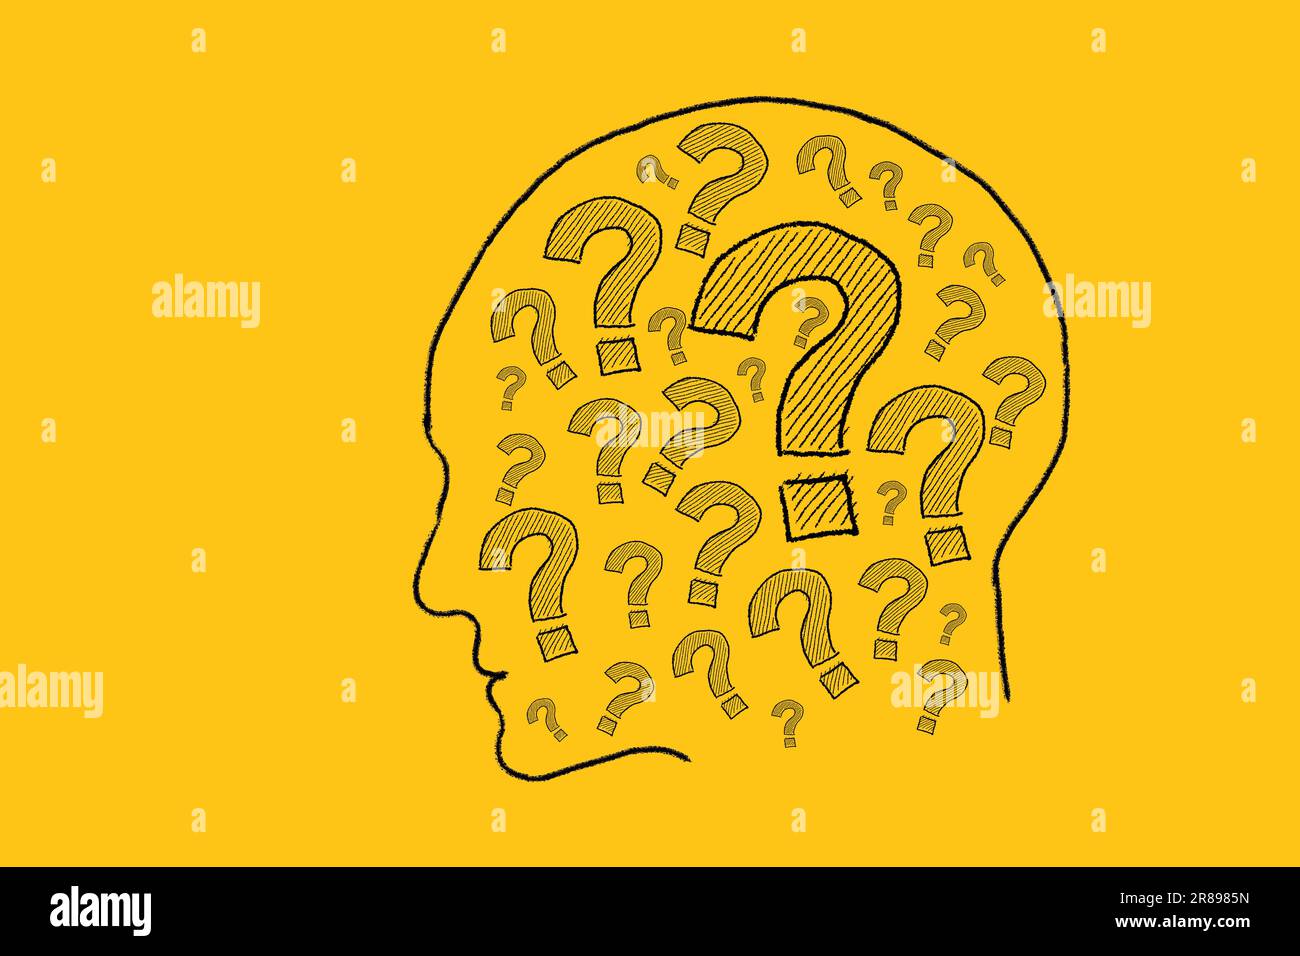 A hand-drawn illustration on a yellow background featuring a human head filled with question marks. Stock Photo